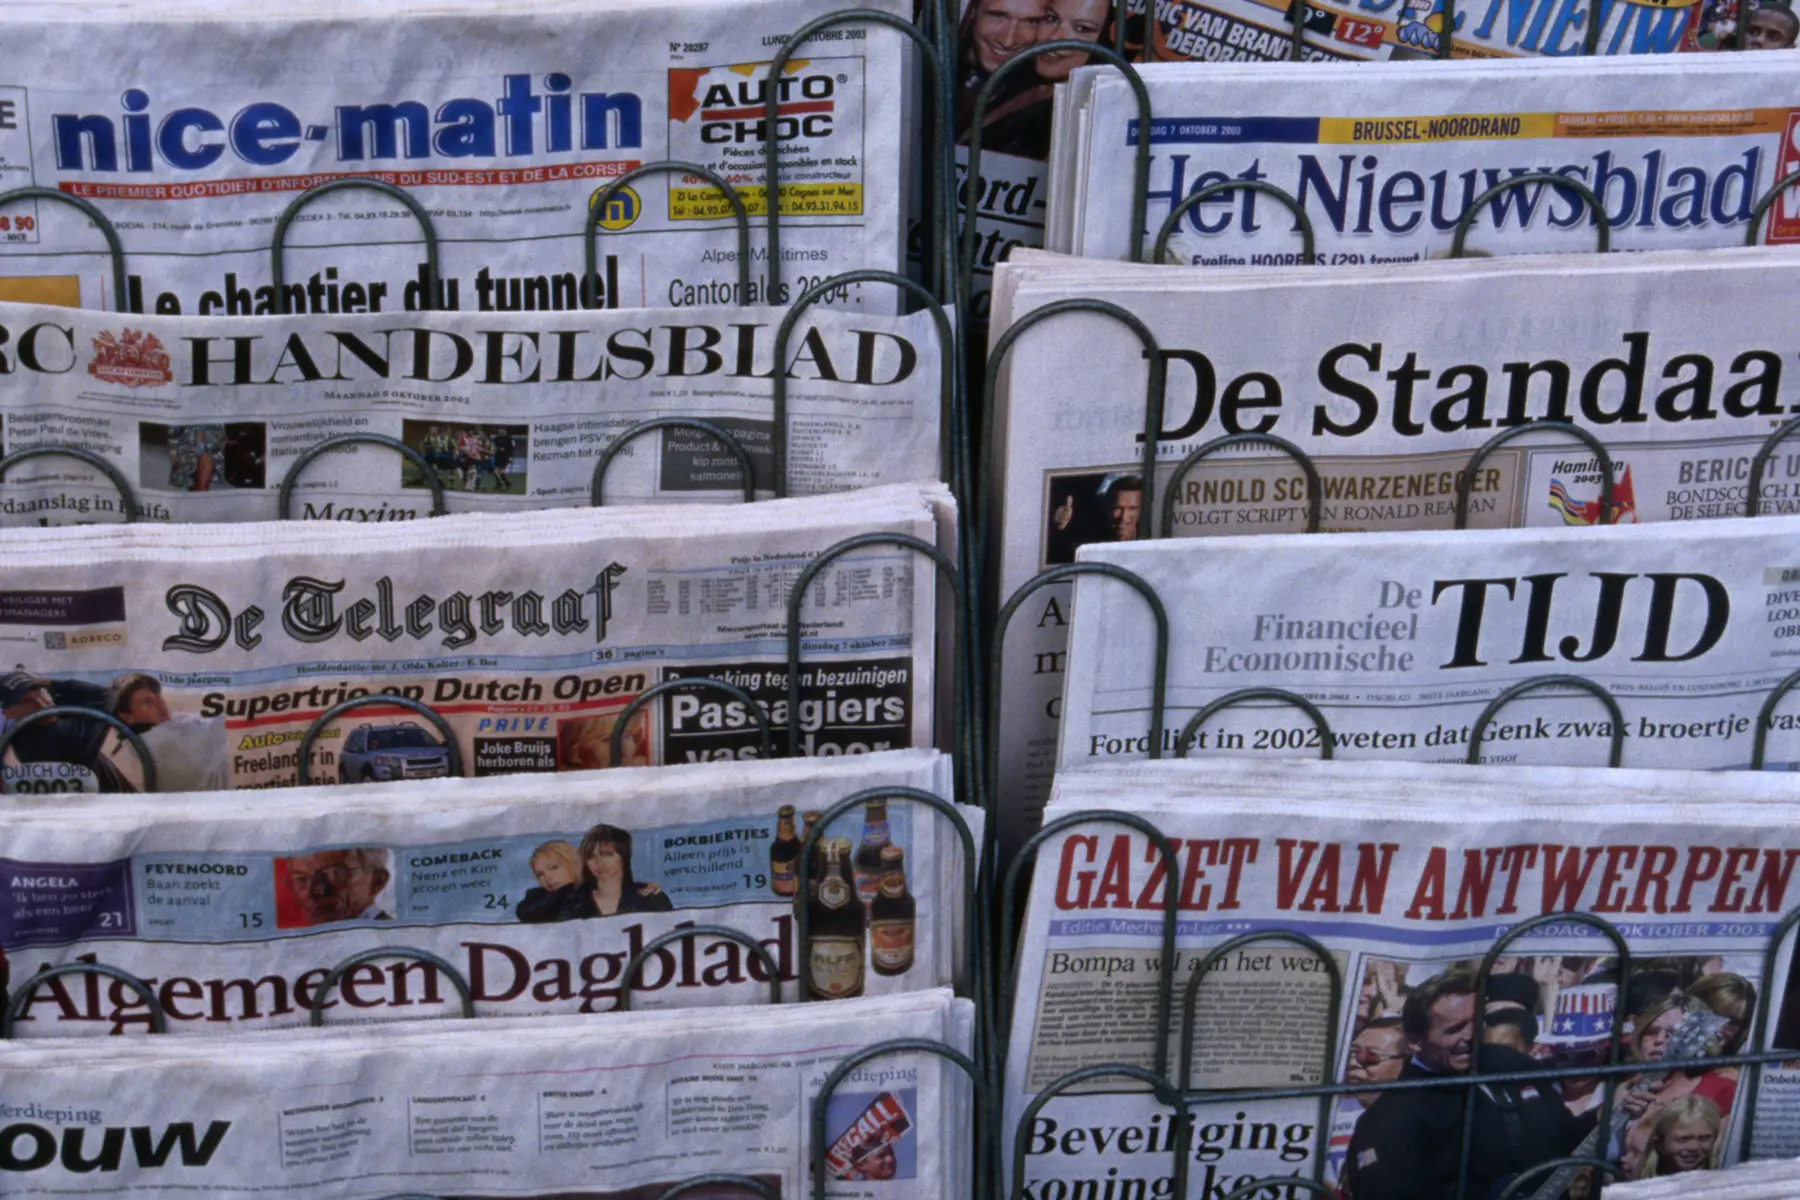 Newspapers on a rack in Brussels